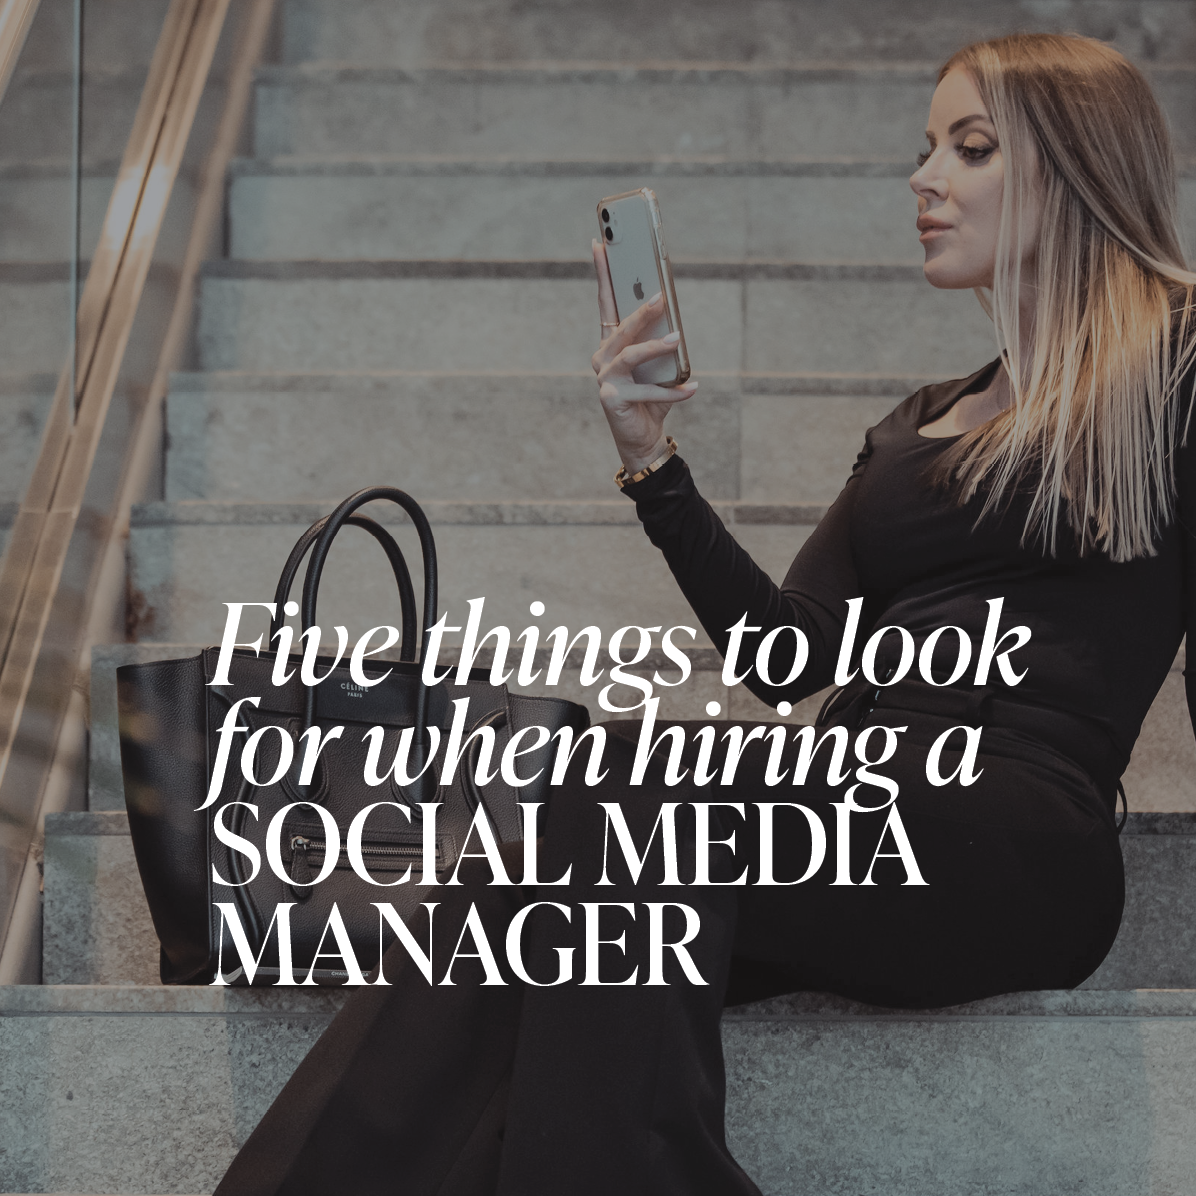 Woman sitting on a staircase looking at her phone with the text overlay "Five things to look for when hiring a social media manager'